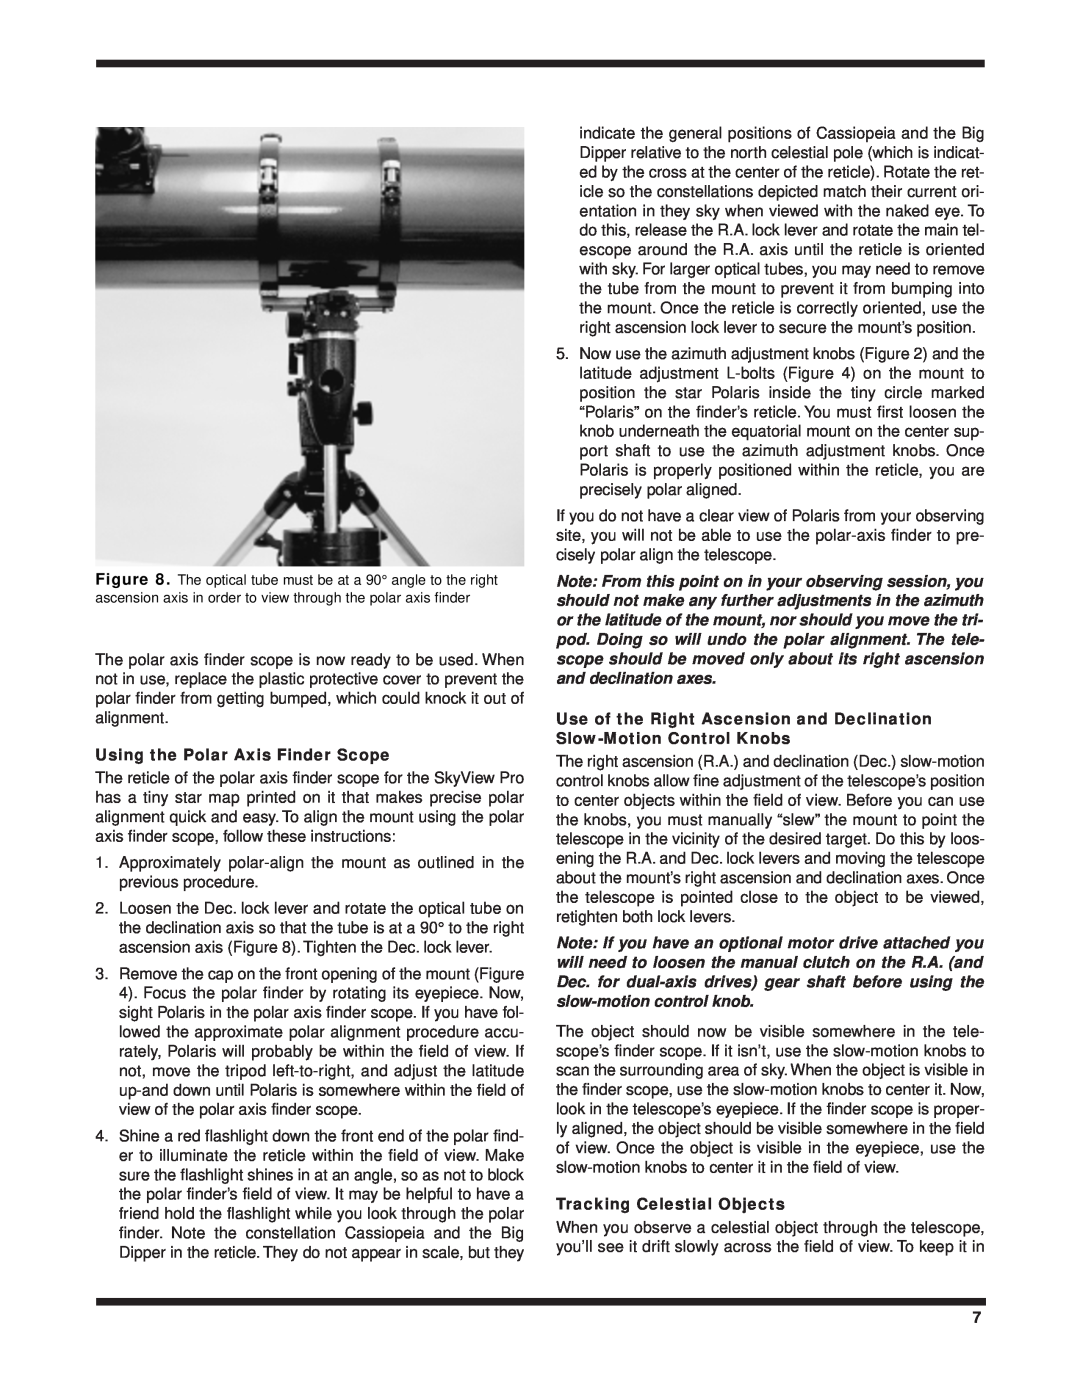 Orion 9829 instruction manual Using the Polar Axis Finder Scope, Tracking Celestial Objects 